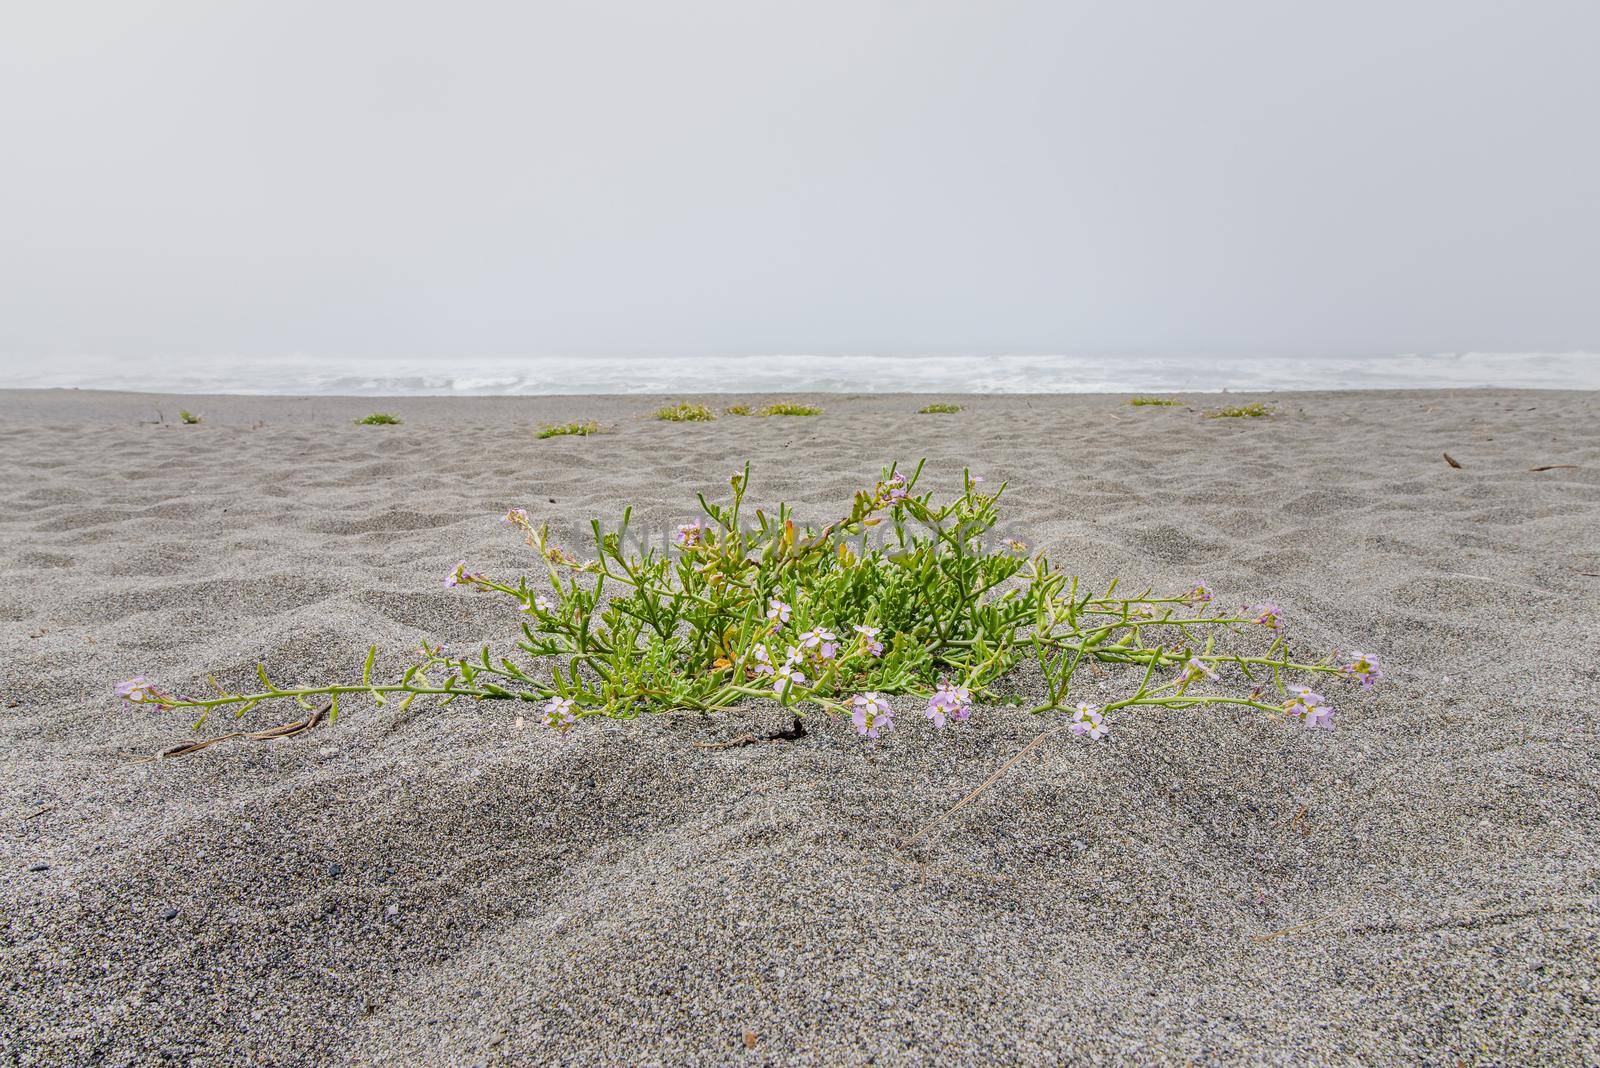 American sea rocket, Cakile edentula, is common on Californian beaches by Pendleton